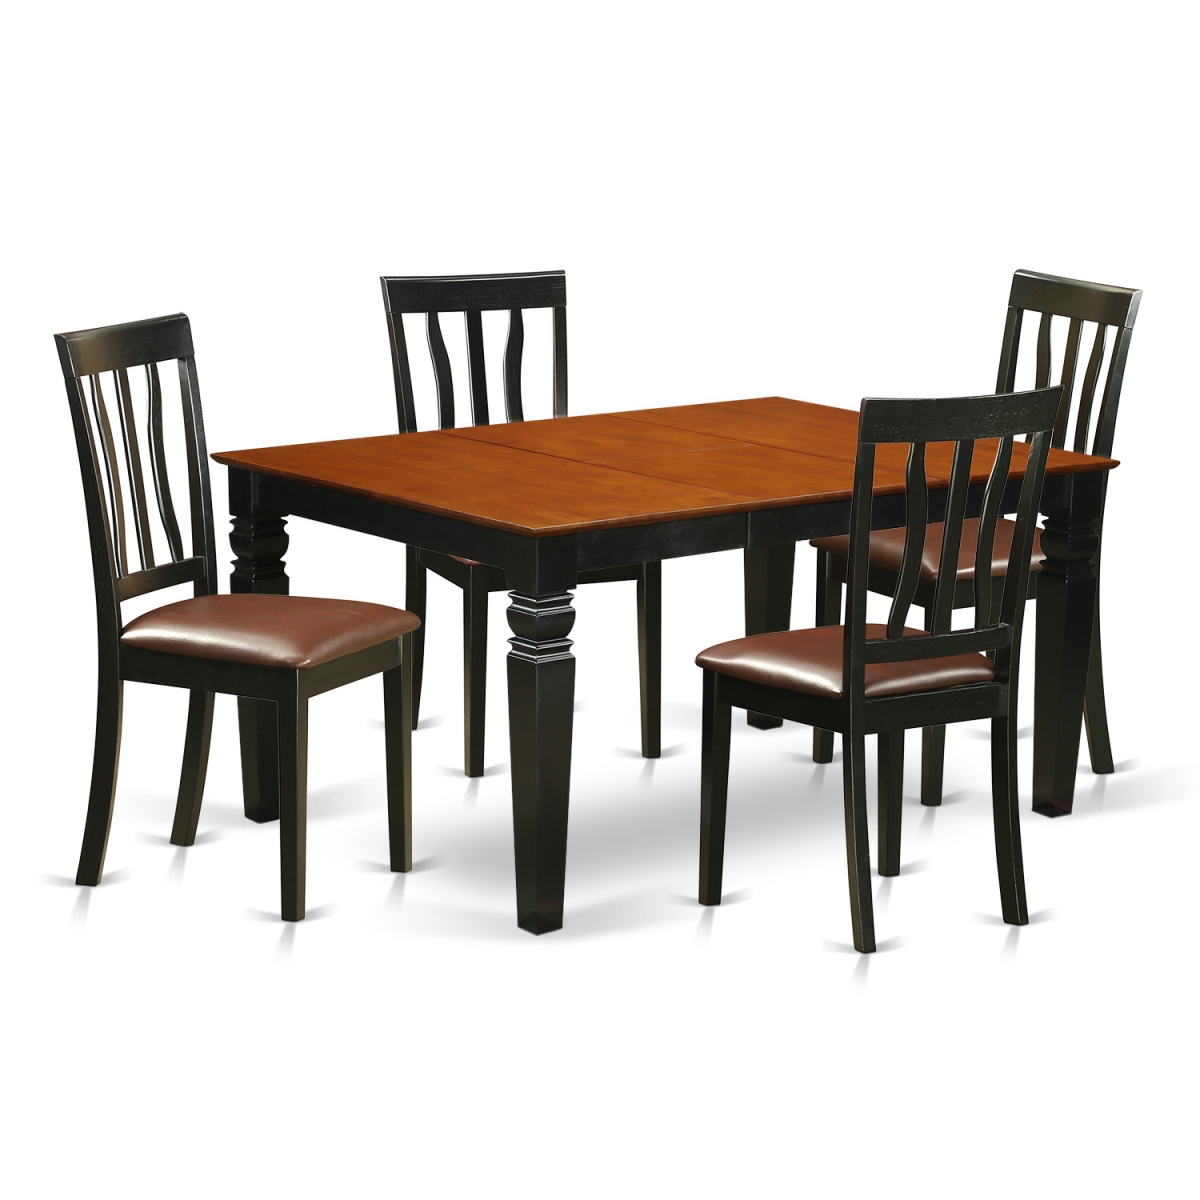 Dinette Set With One Weston Table & 4 Faux Leather Upholstery Seat Chairs, Elegant Black - 5 Piece